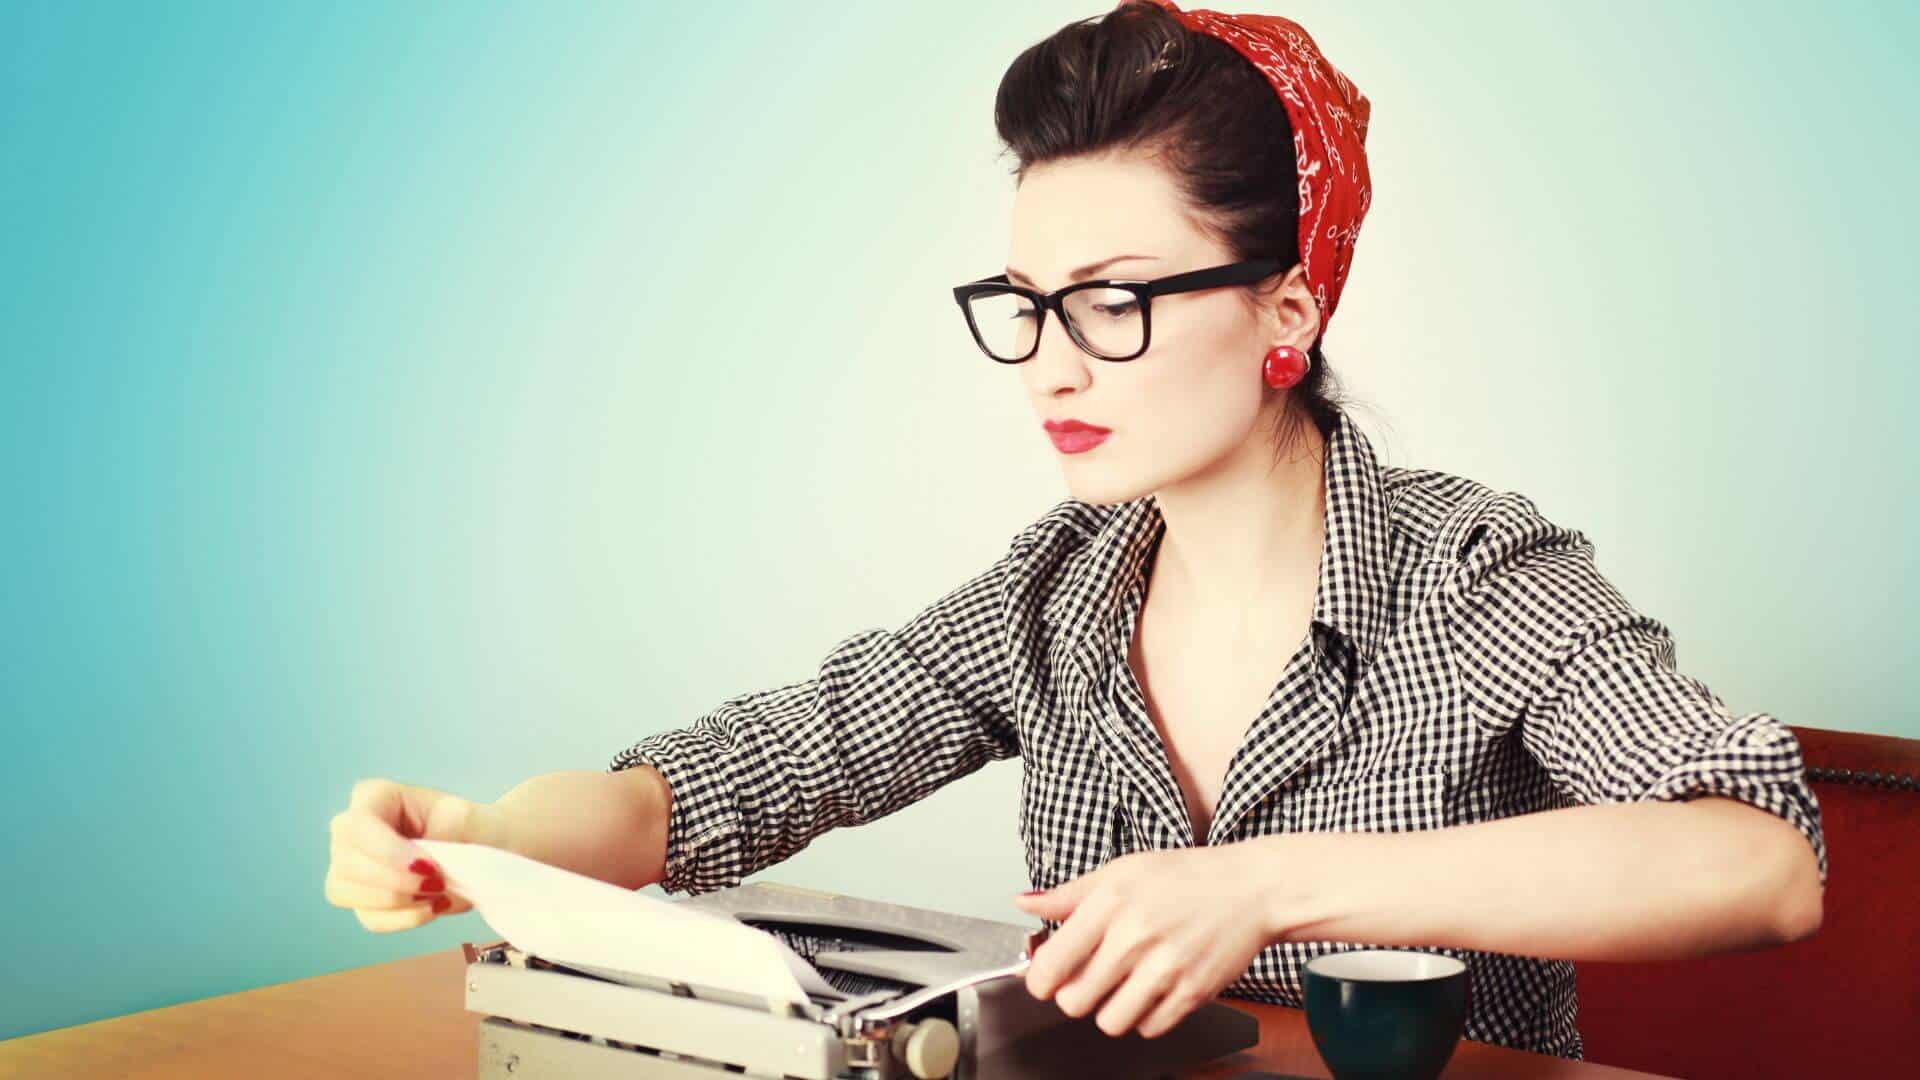 graphic of retro woman working on a typewriter
